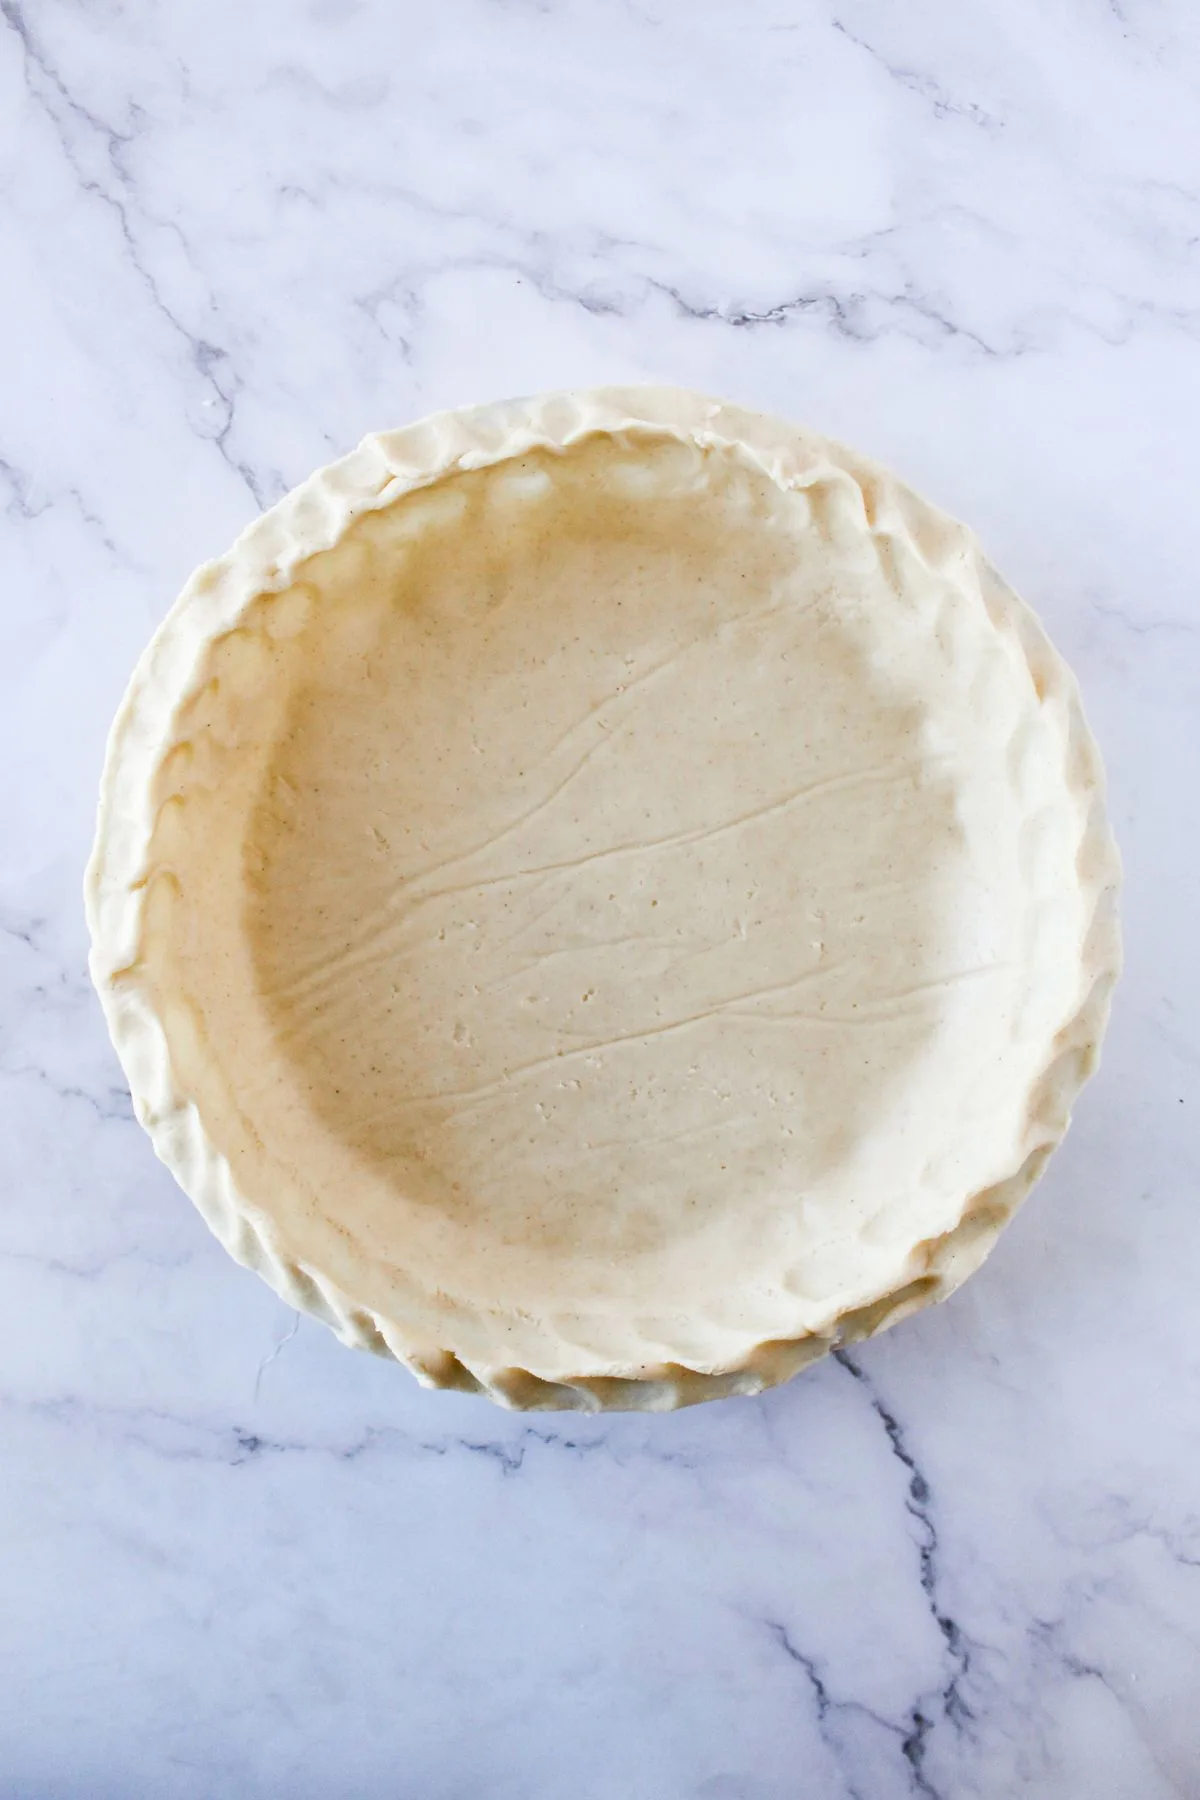 Looking down on a glute free pie crust to be baked.